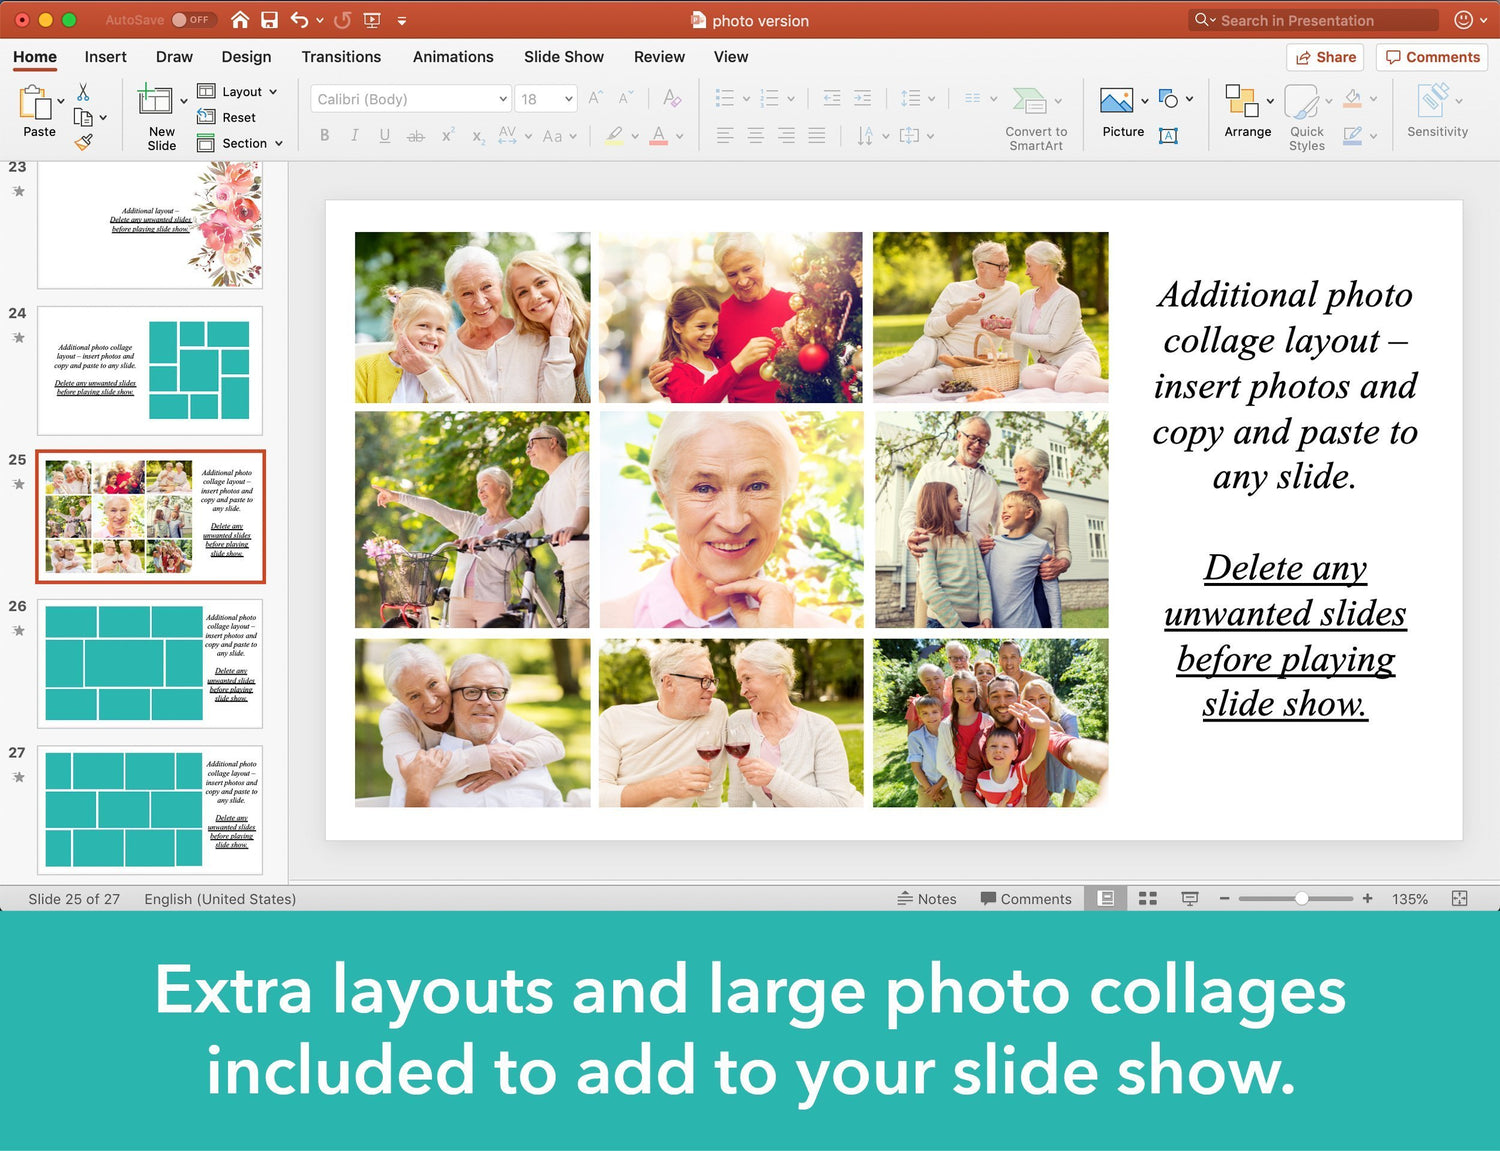 Spring Flowers Funeral Slide Show Template